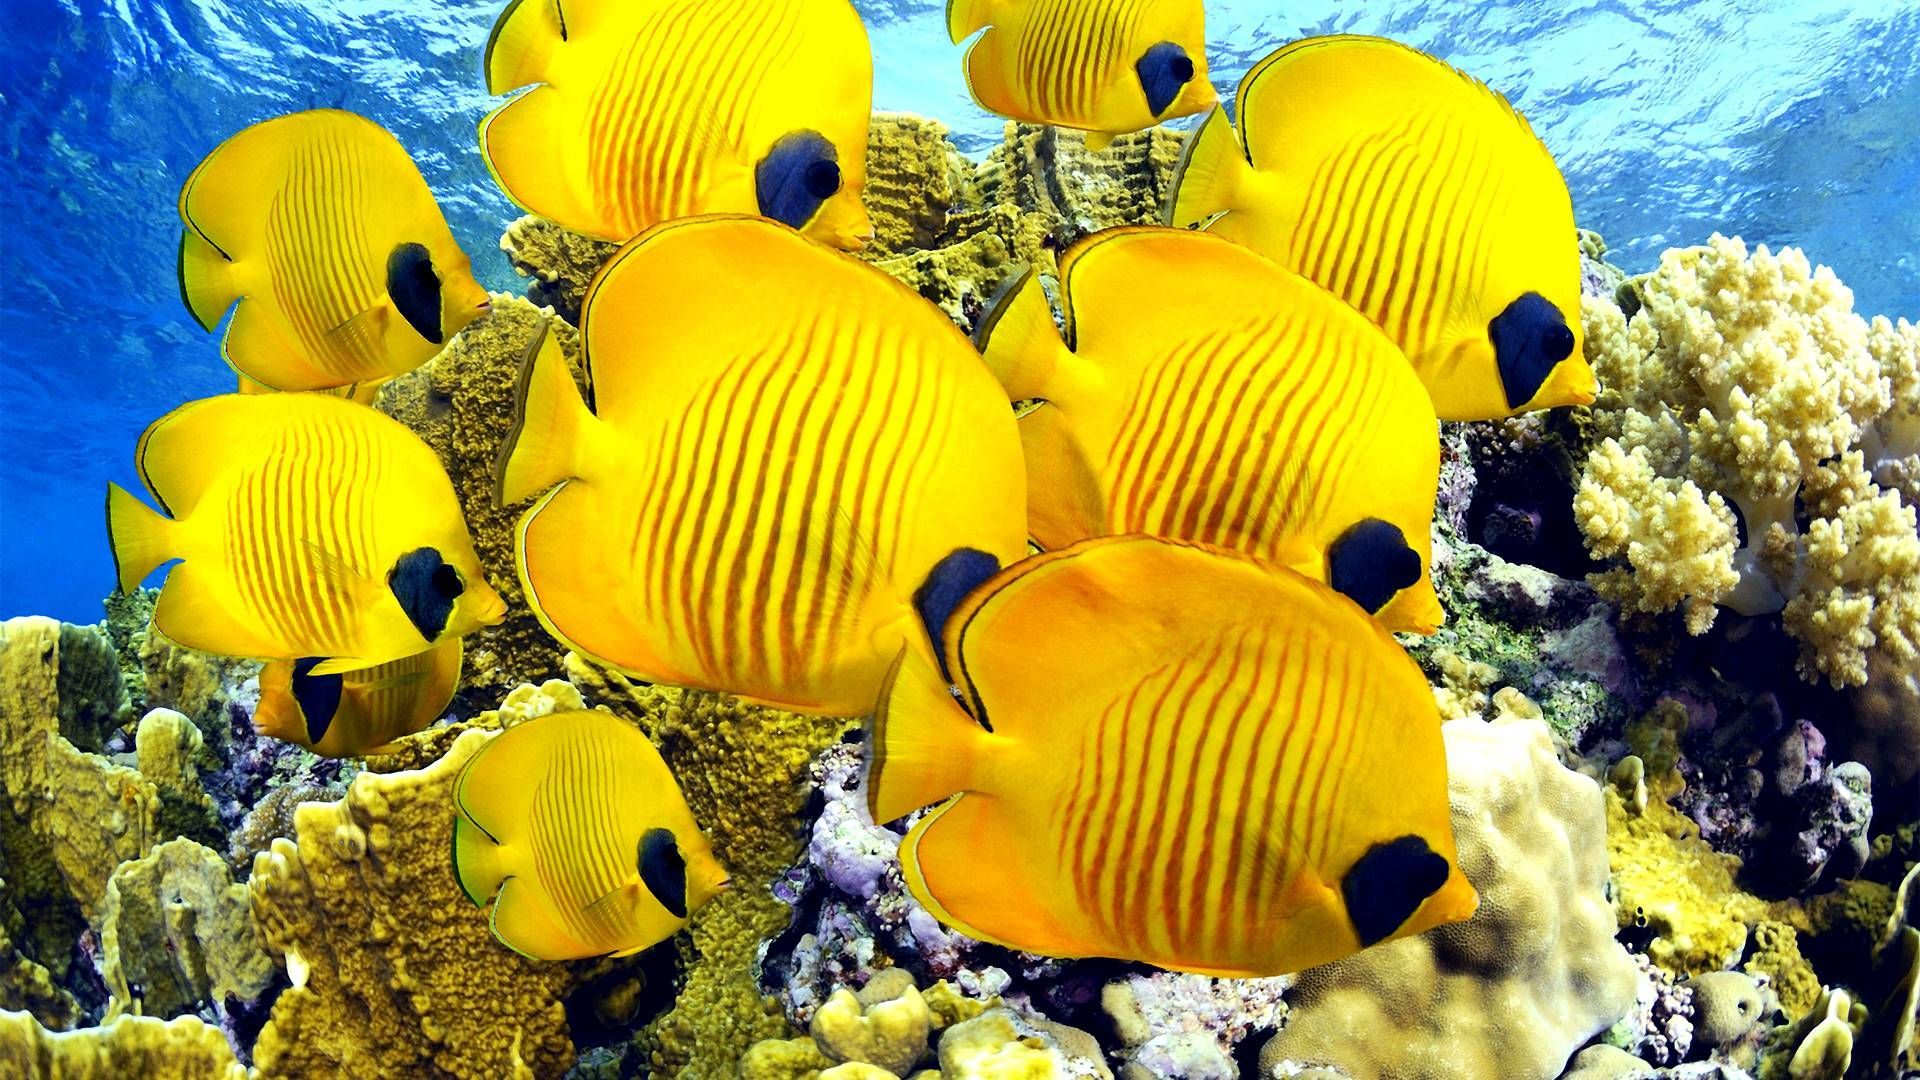 Beautiful Fish Wallpapers HD Pictures One HD Wallpaper Pictures 1920